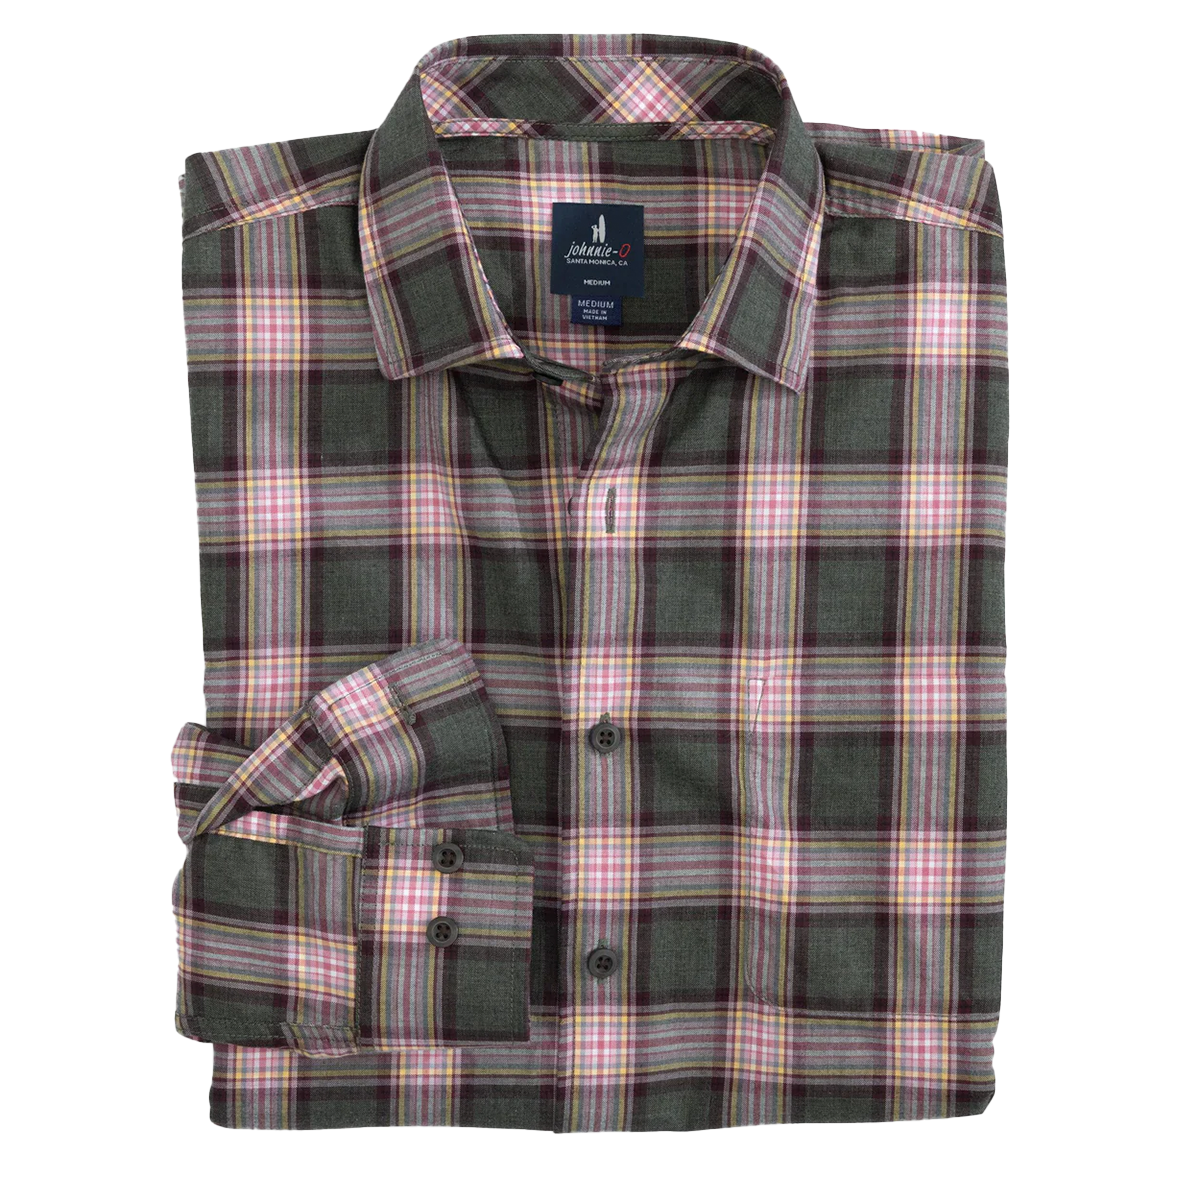 Roanoke Tucked Button Up Shirt